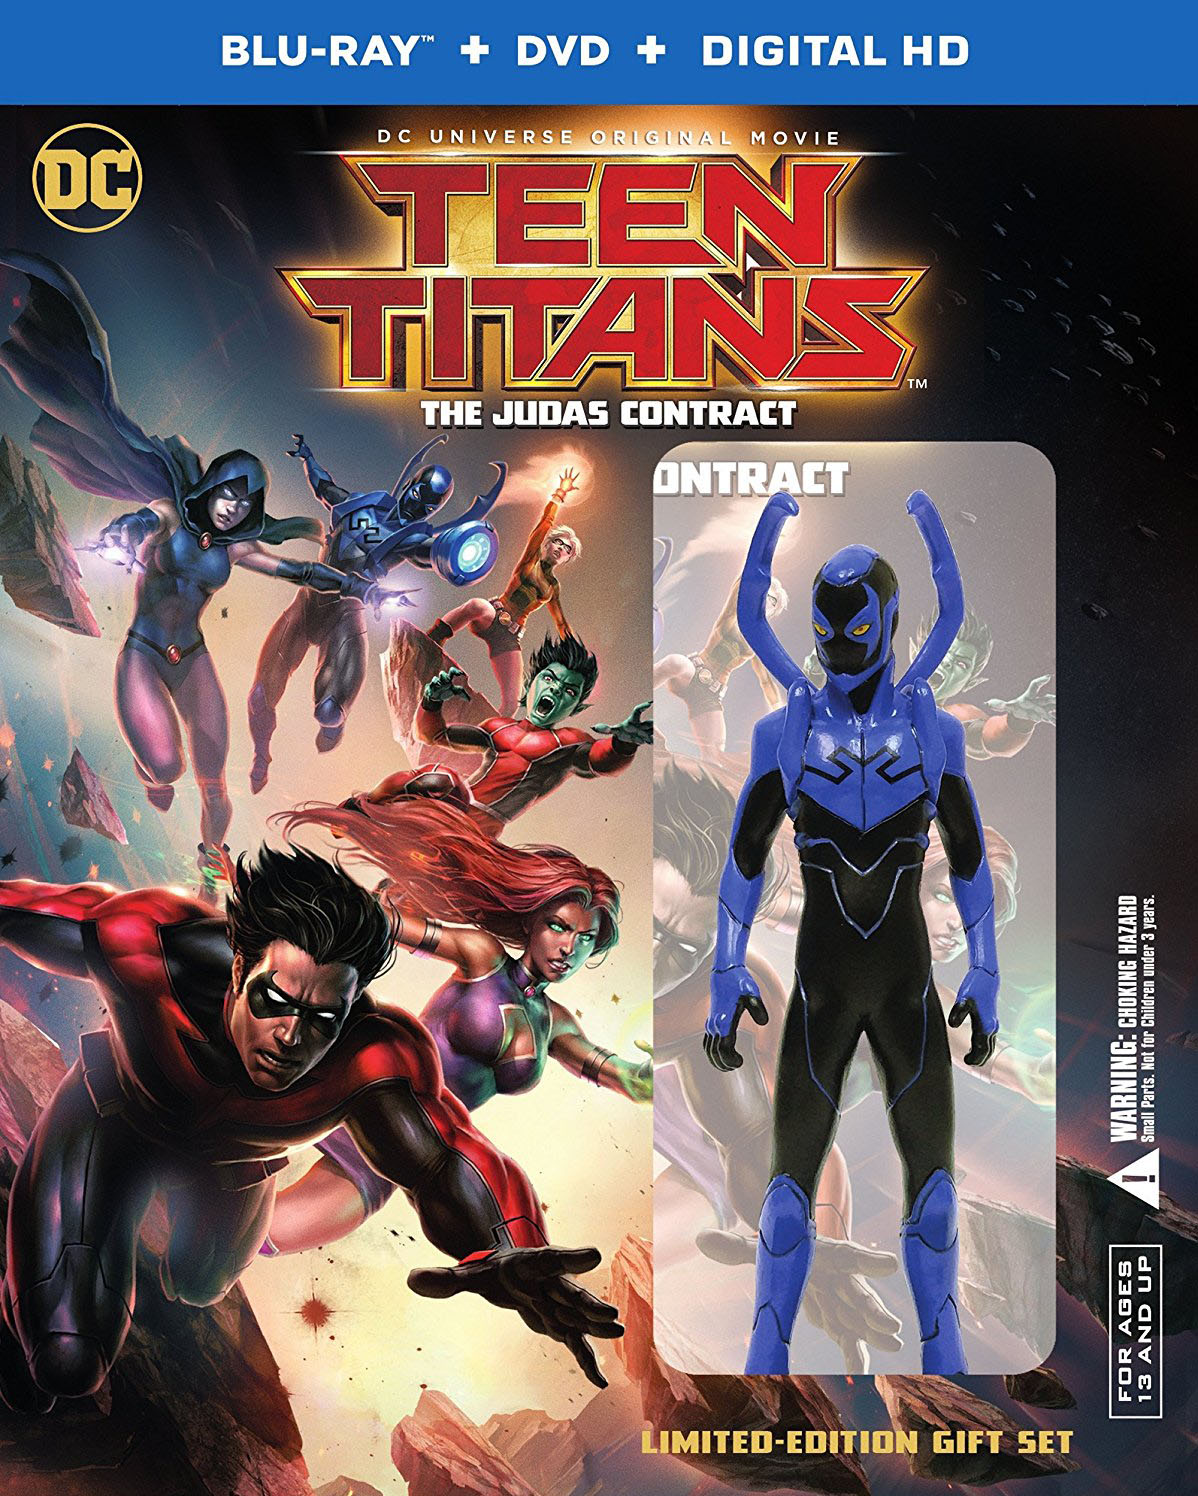 Teen Titans: The Judas Contract [Deluxe Edition] [Blu-ray] [2017] - Best Buy